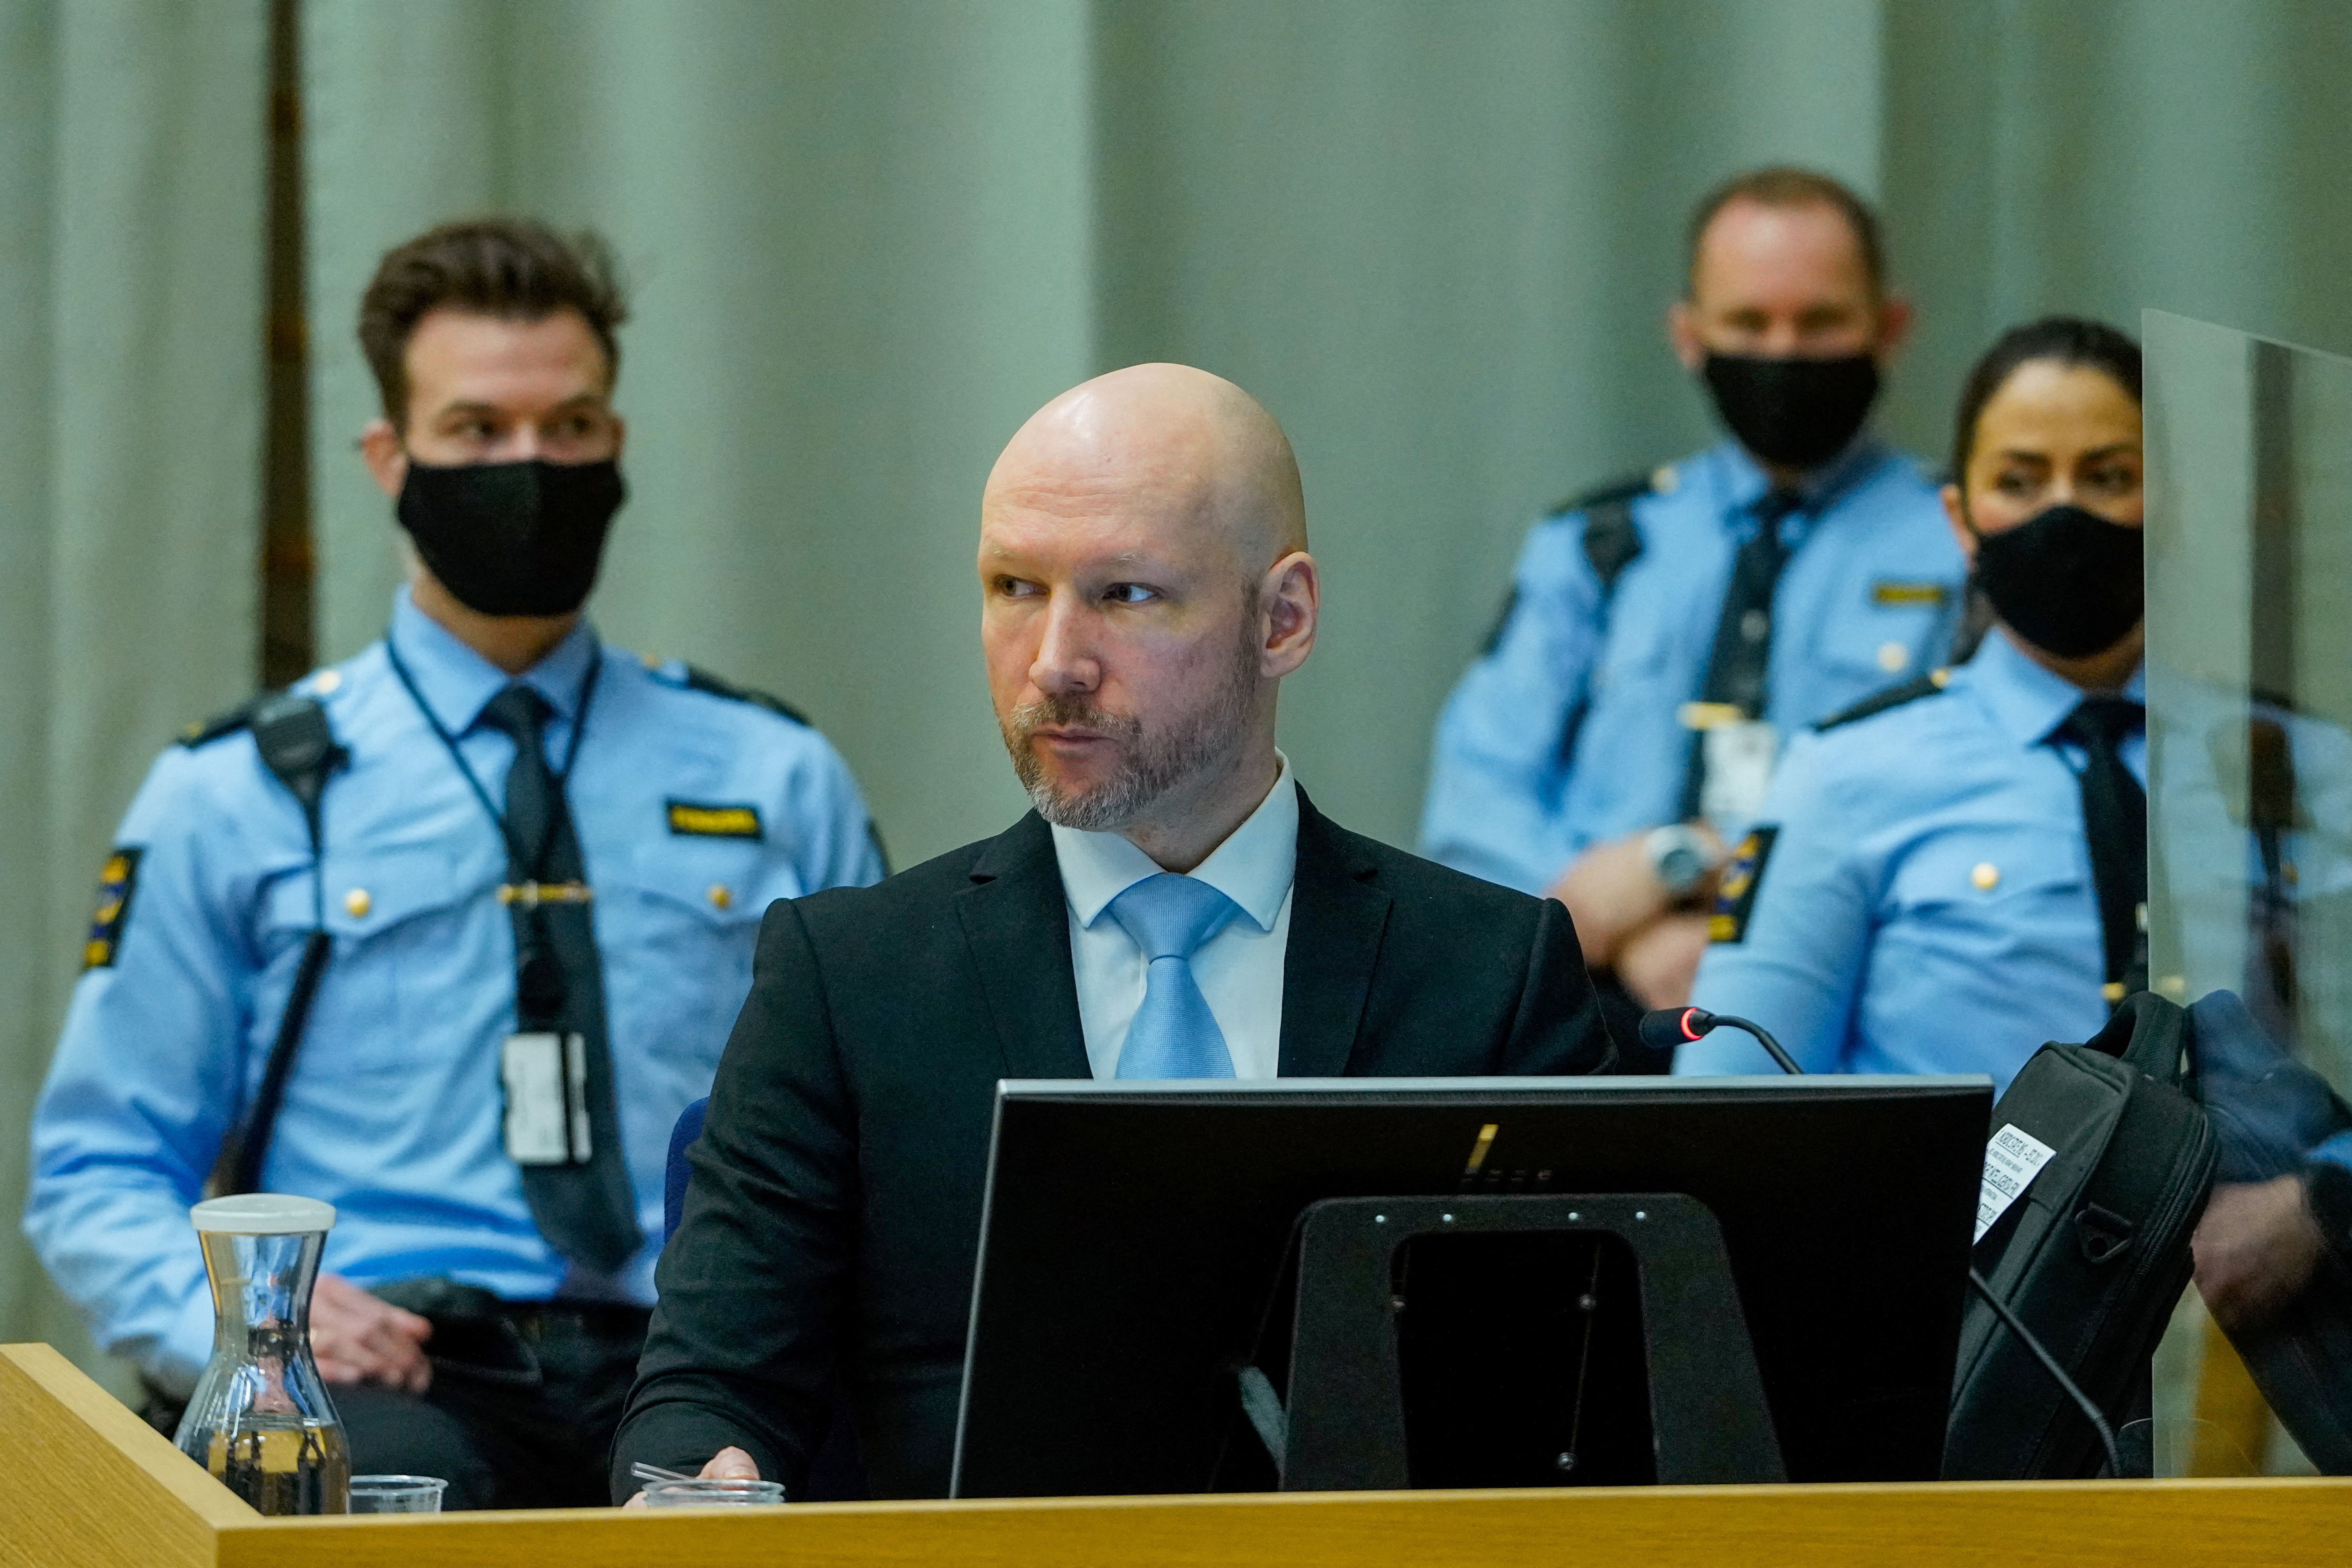 Court hearing for mass killer Anders Behring Breivik's parole request